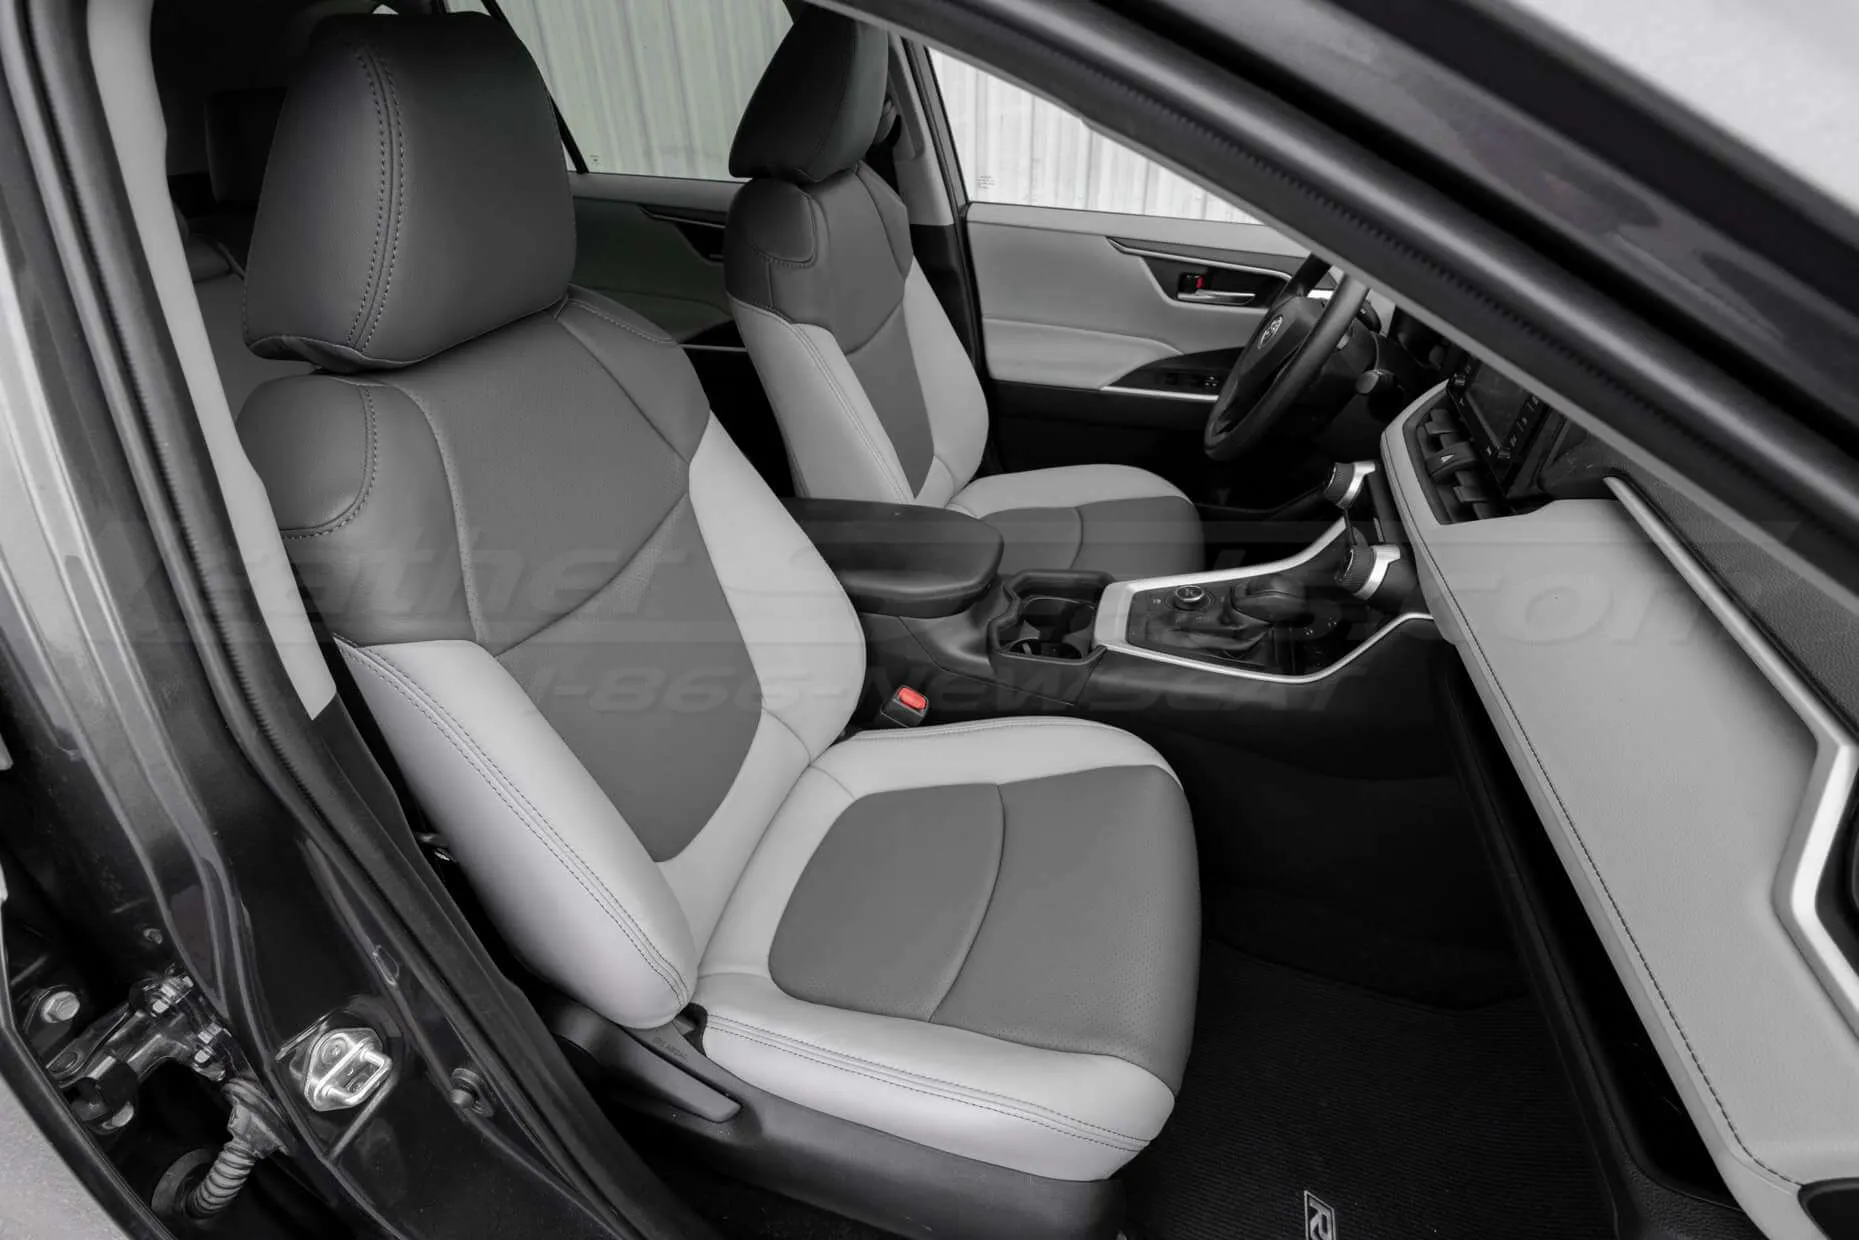 Alternative angle of front passenger seat with installed LeatherSeats.com upholstery